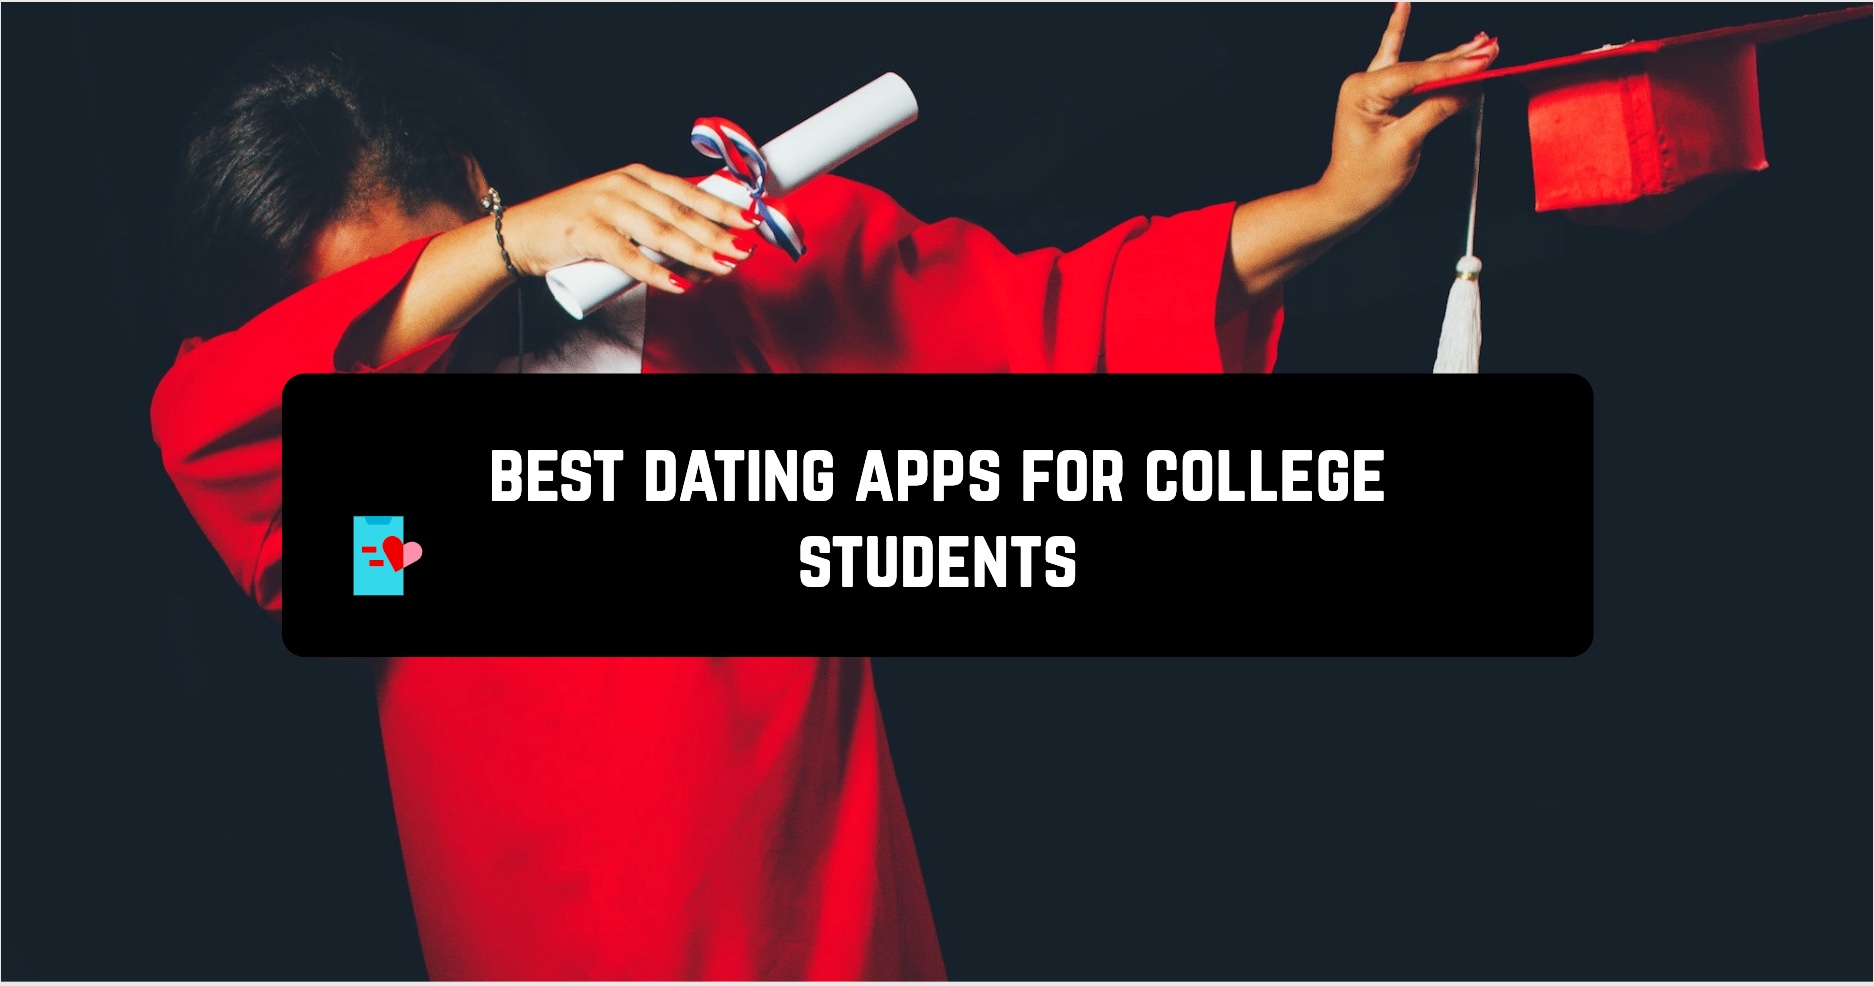 Best dating apps for college students